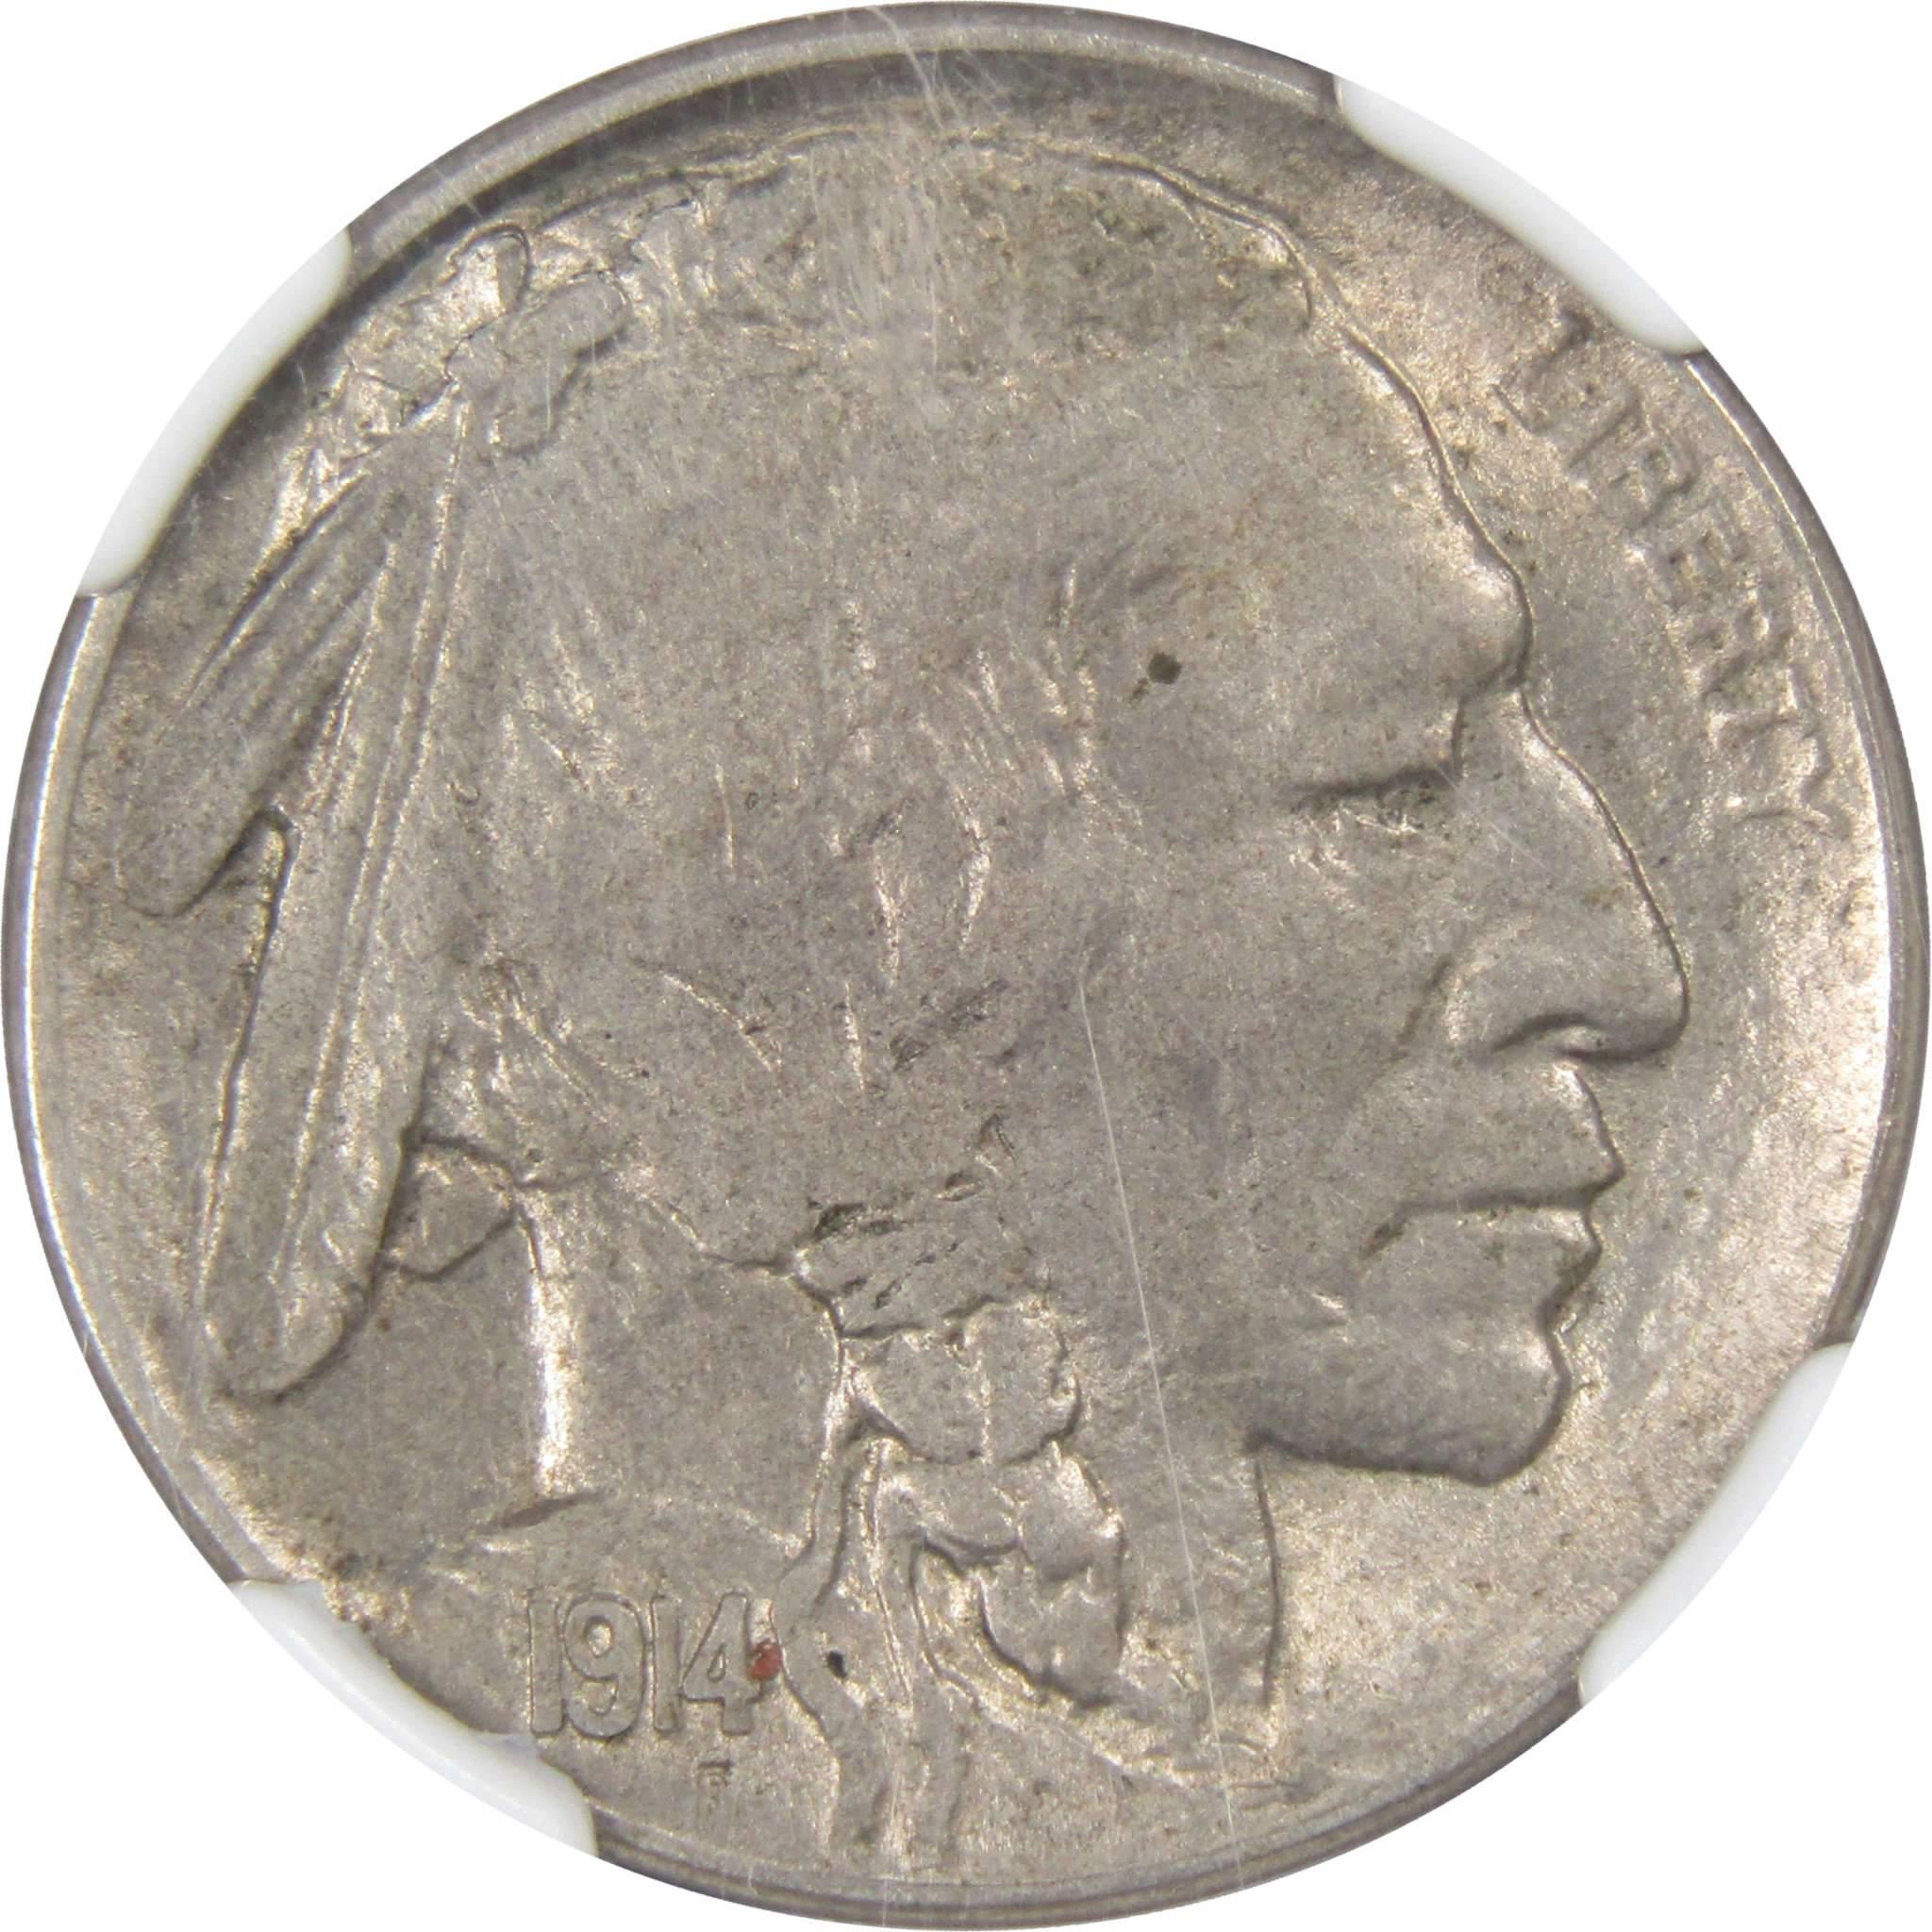 1914 D Indian Head Buffalo Nickel 5 Cent Piece AU 55 NGC 5c US Coin Collectible